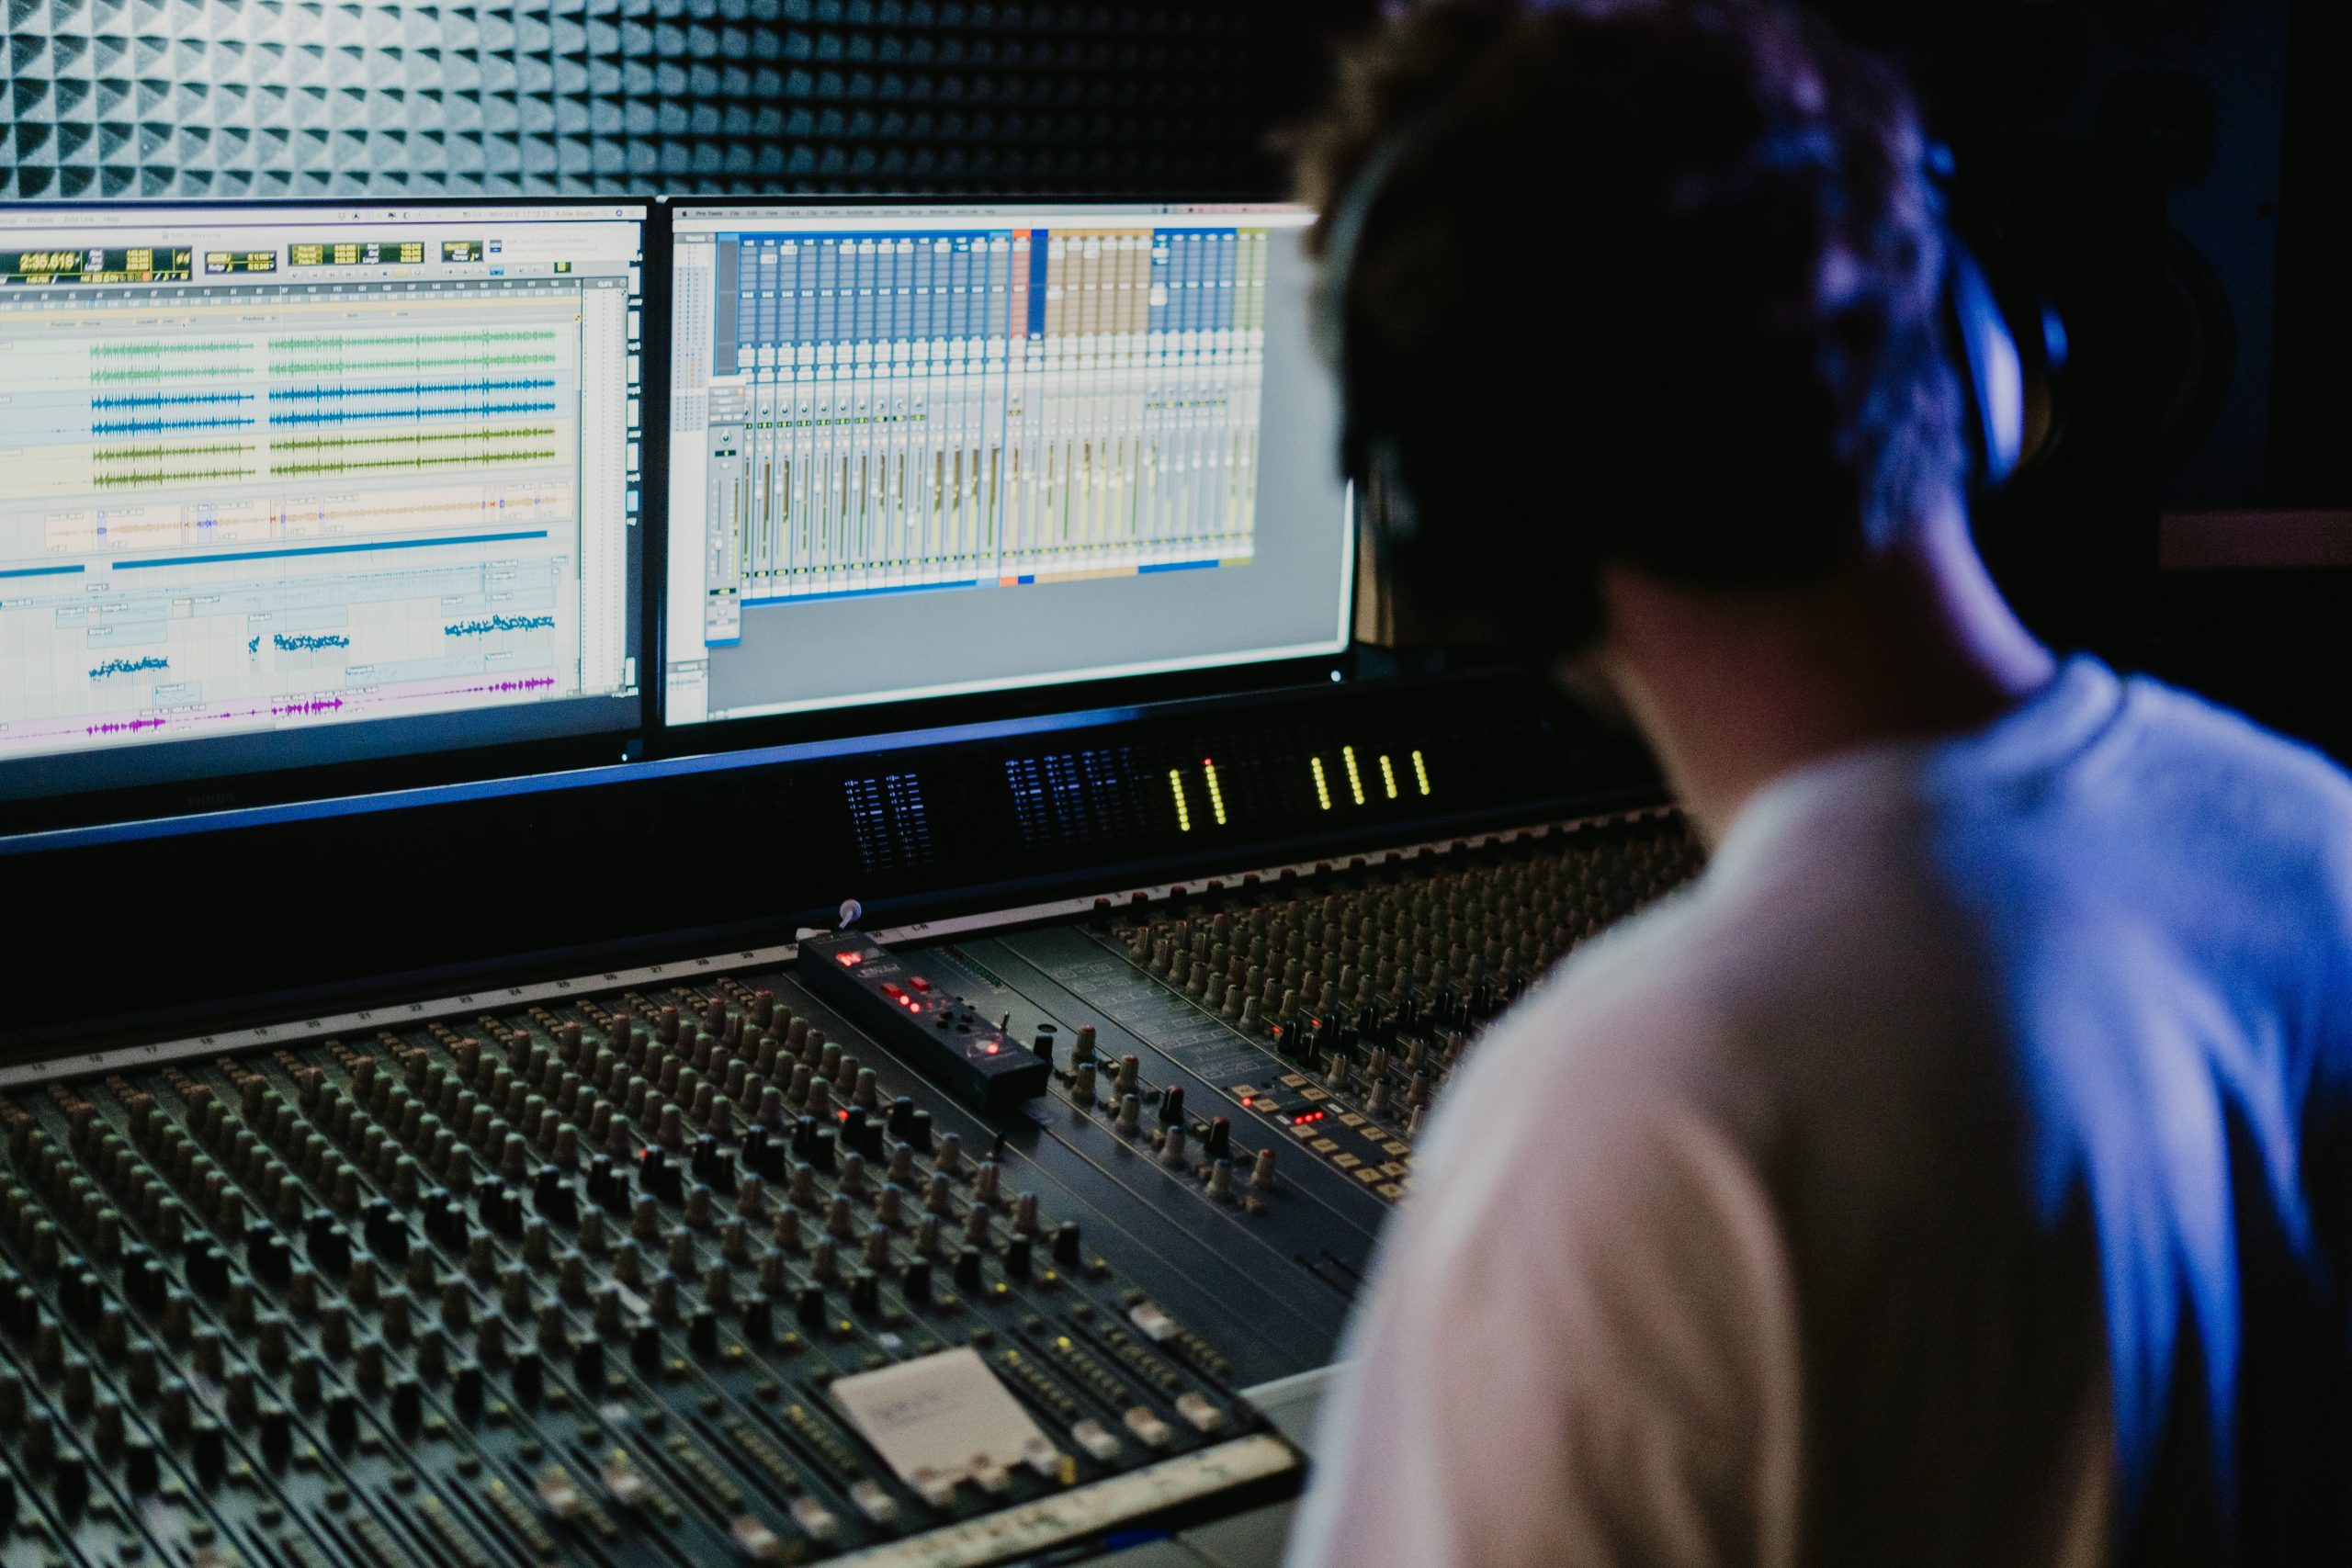 Deep Data Analysis for Quality Inspection Records
Photo by Tima Miroshnichenko: https://www.pexels.com/photo/a-man-in-control-of-the-audio-mixer-4988139/